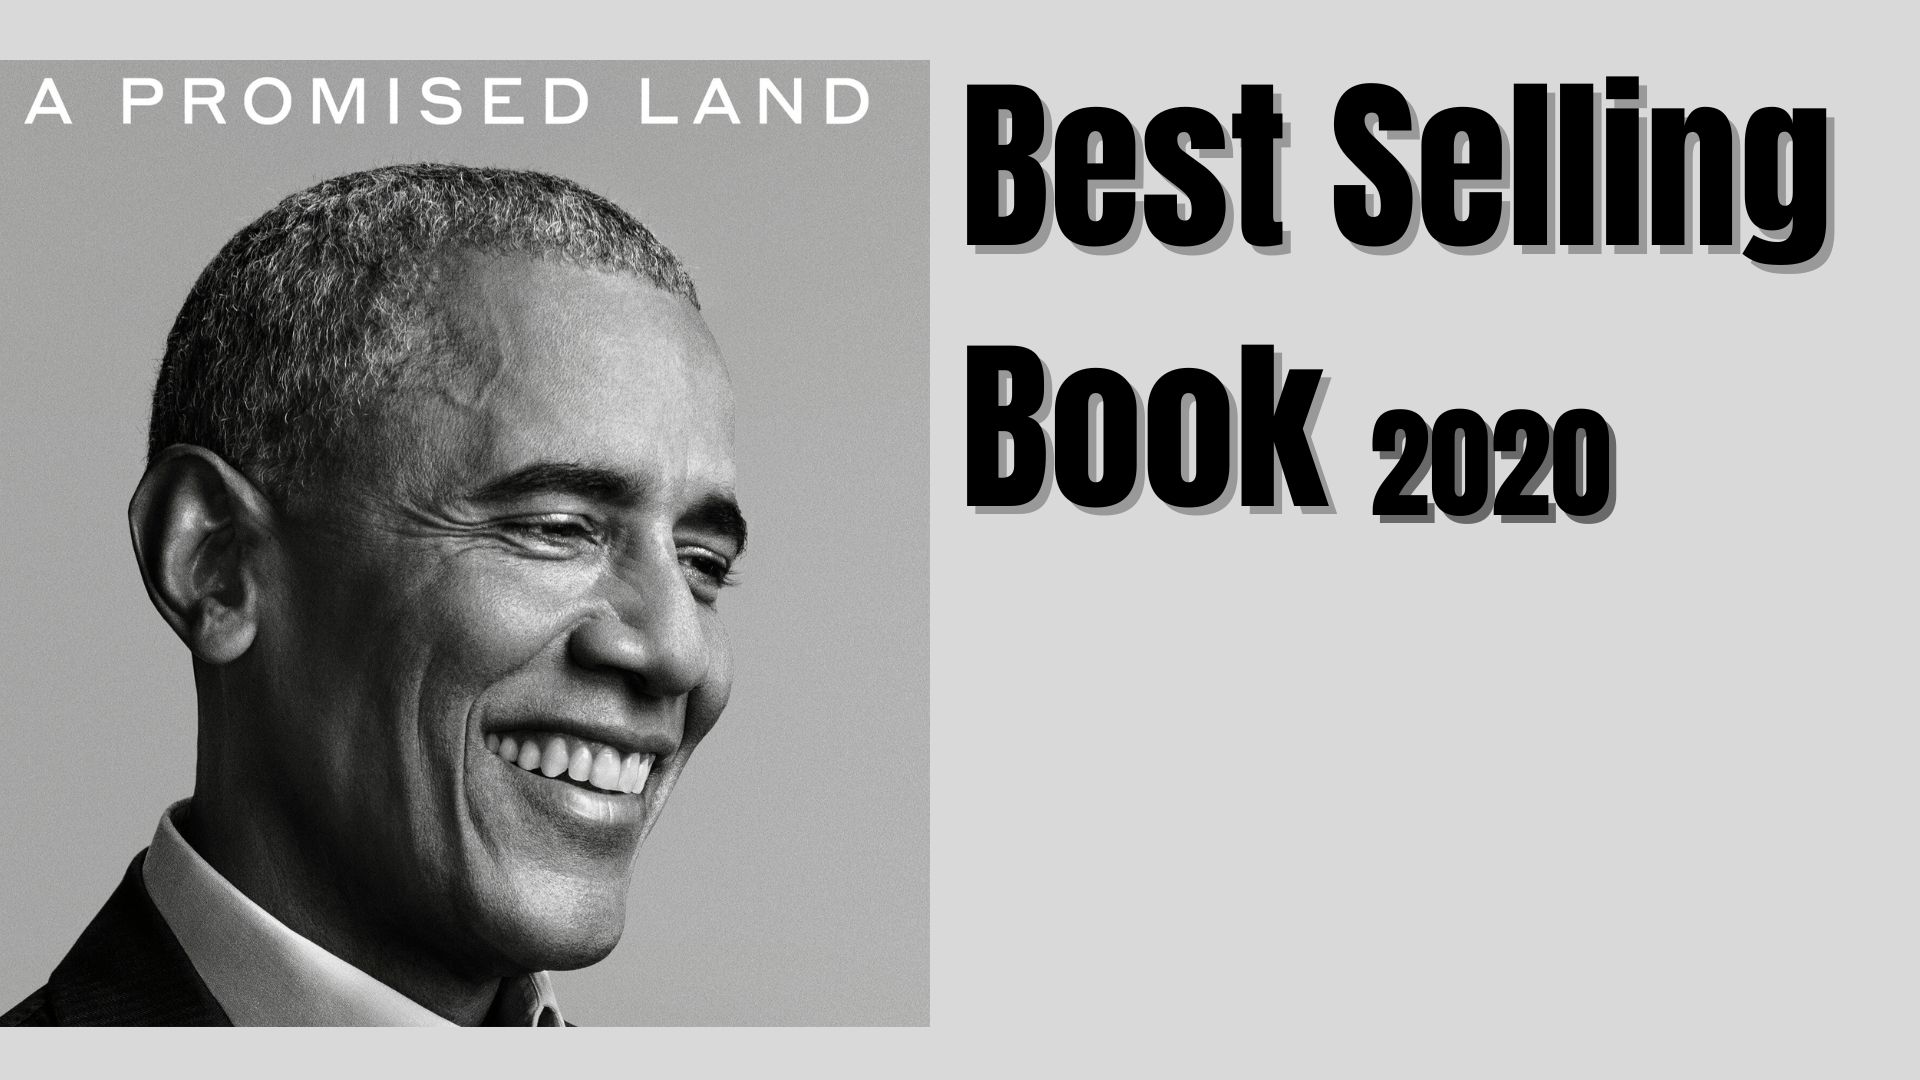 A Promised Land: Best Selling Book - 2020